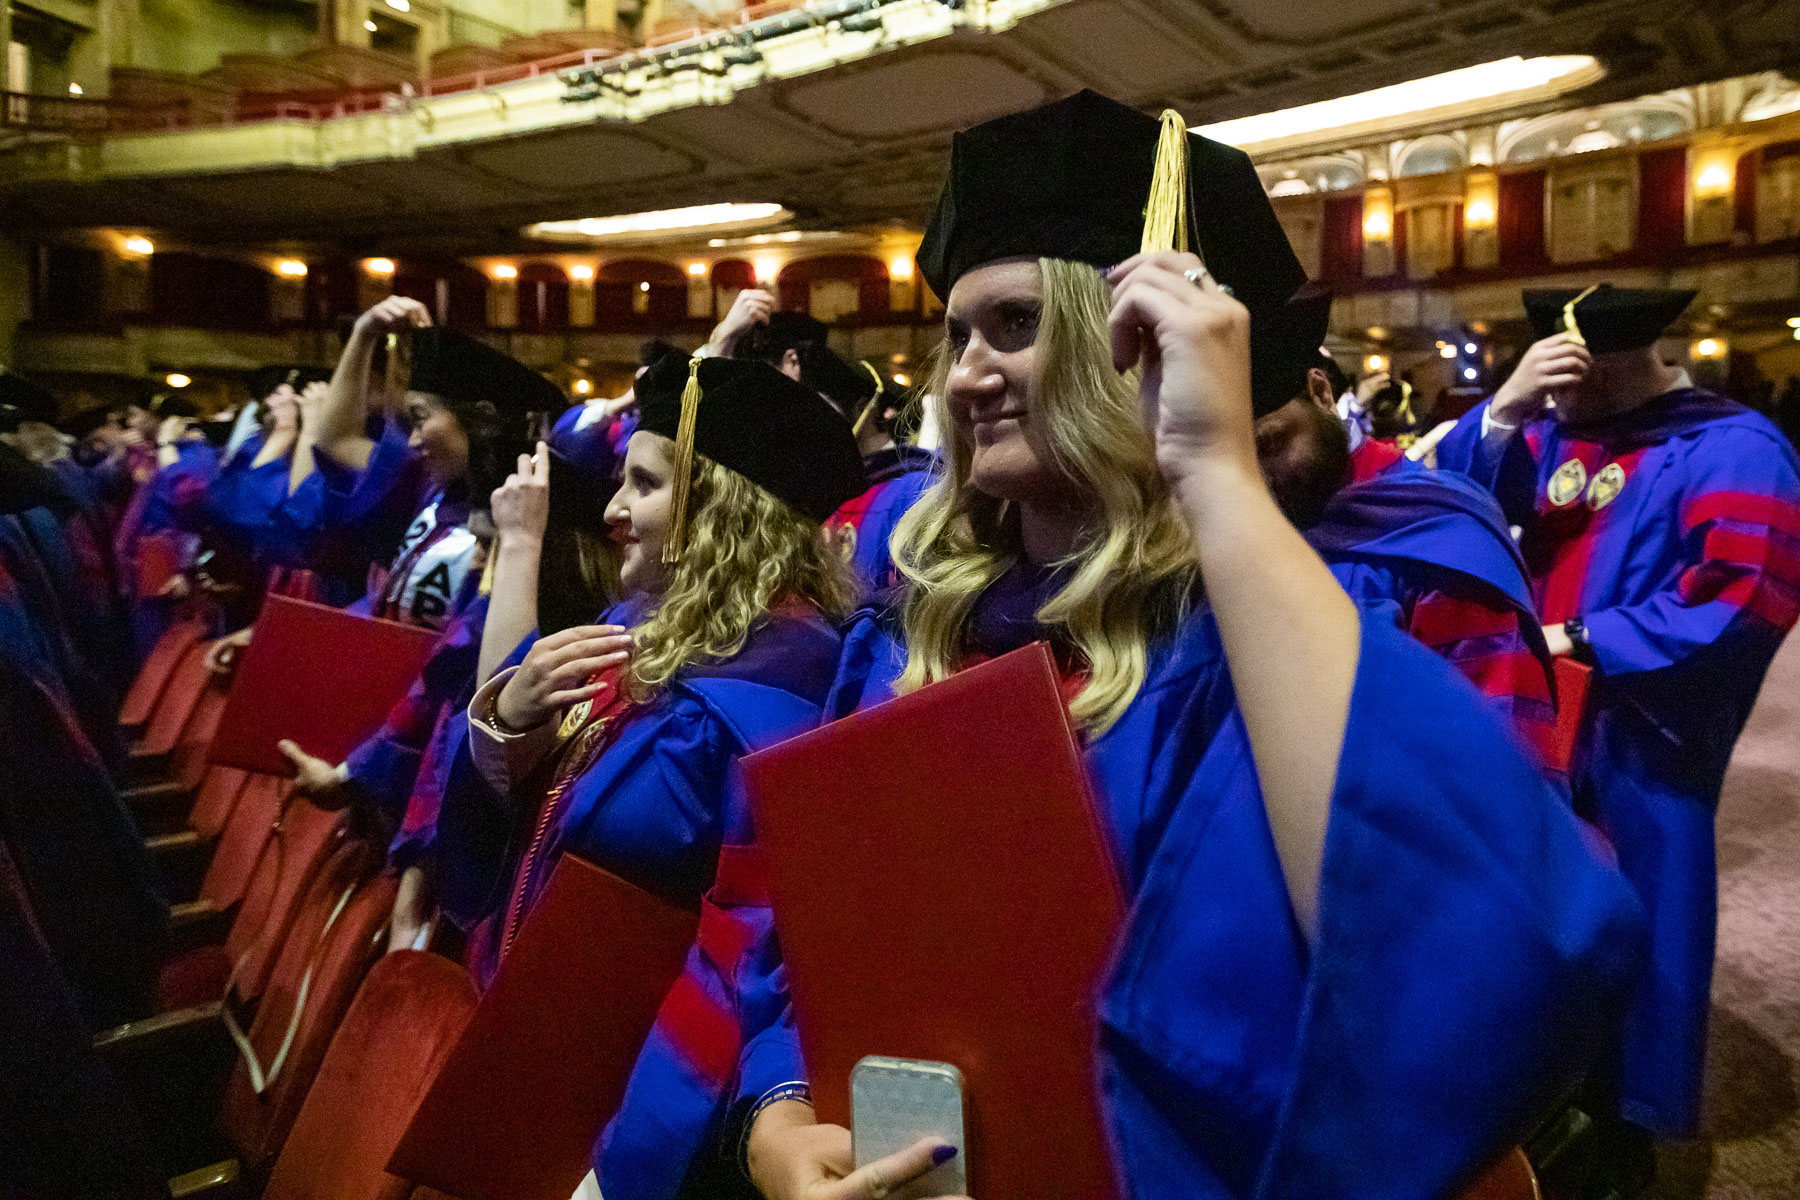 Students flip their tassels after receiving their degrees at the DePaul University College of Law commencement ceremony.